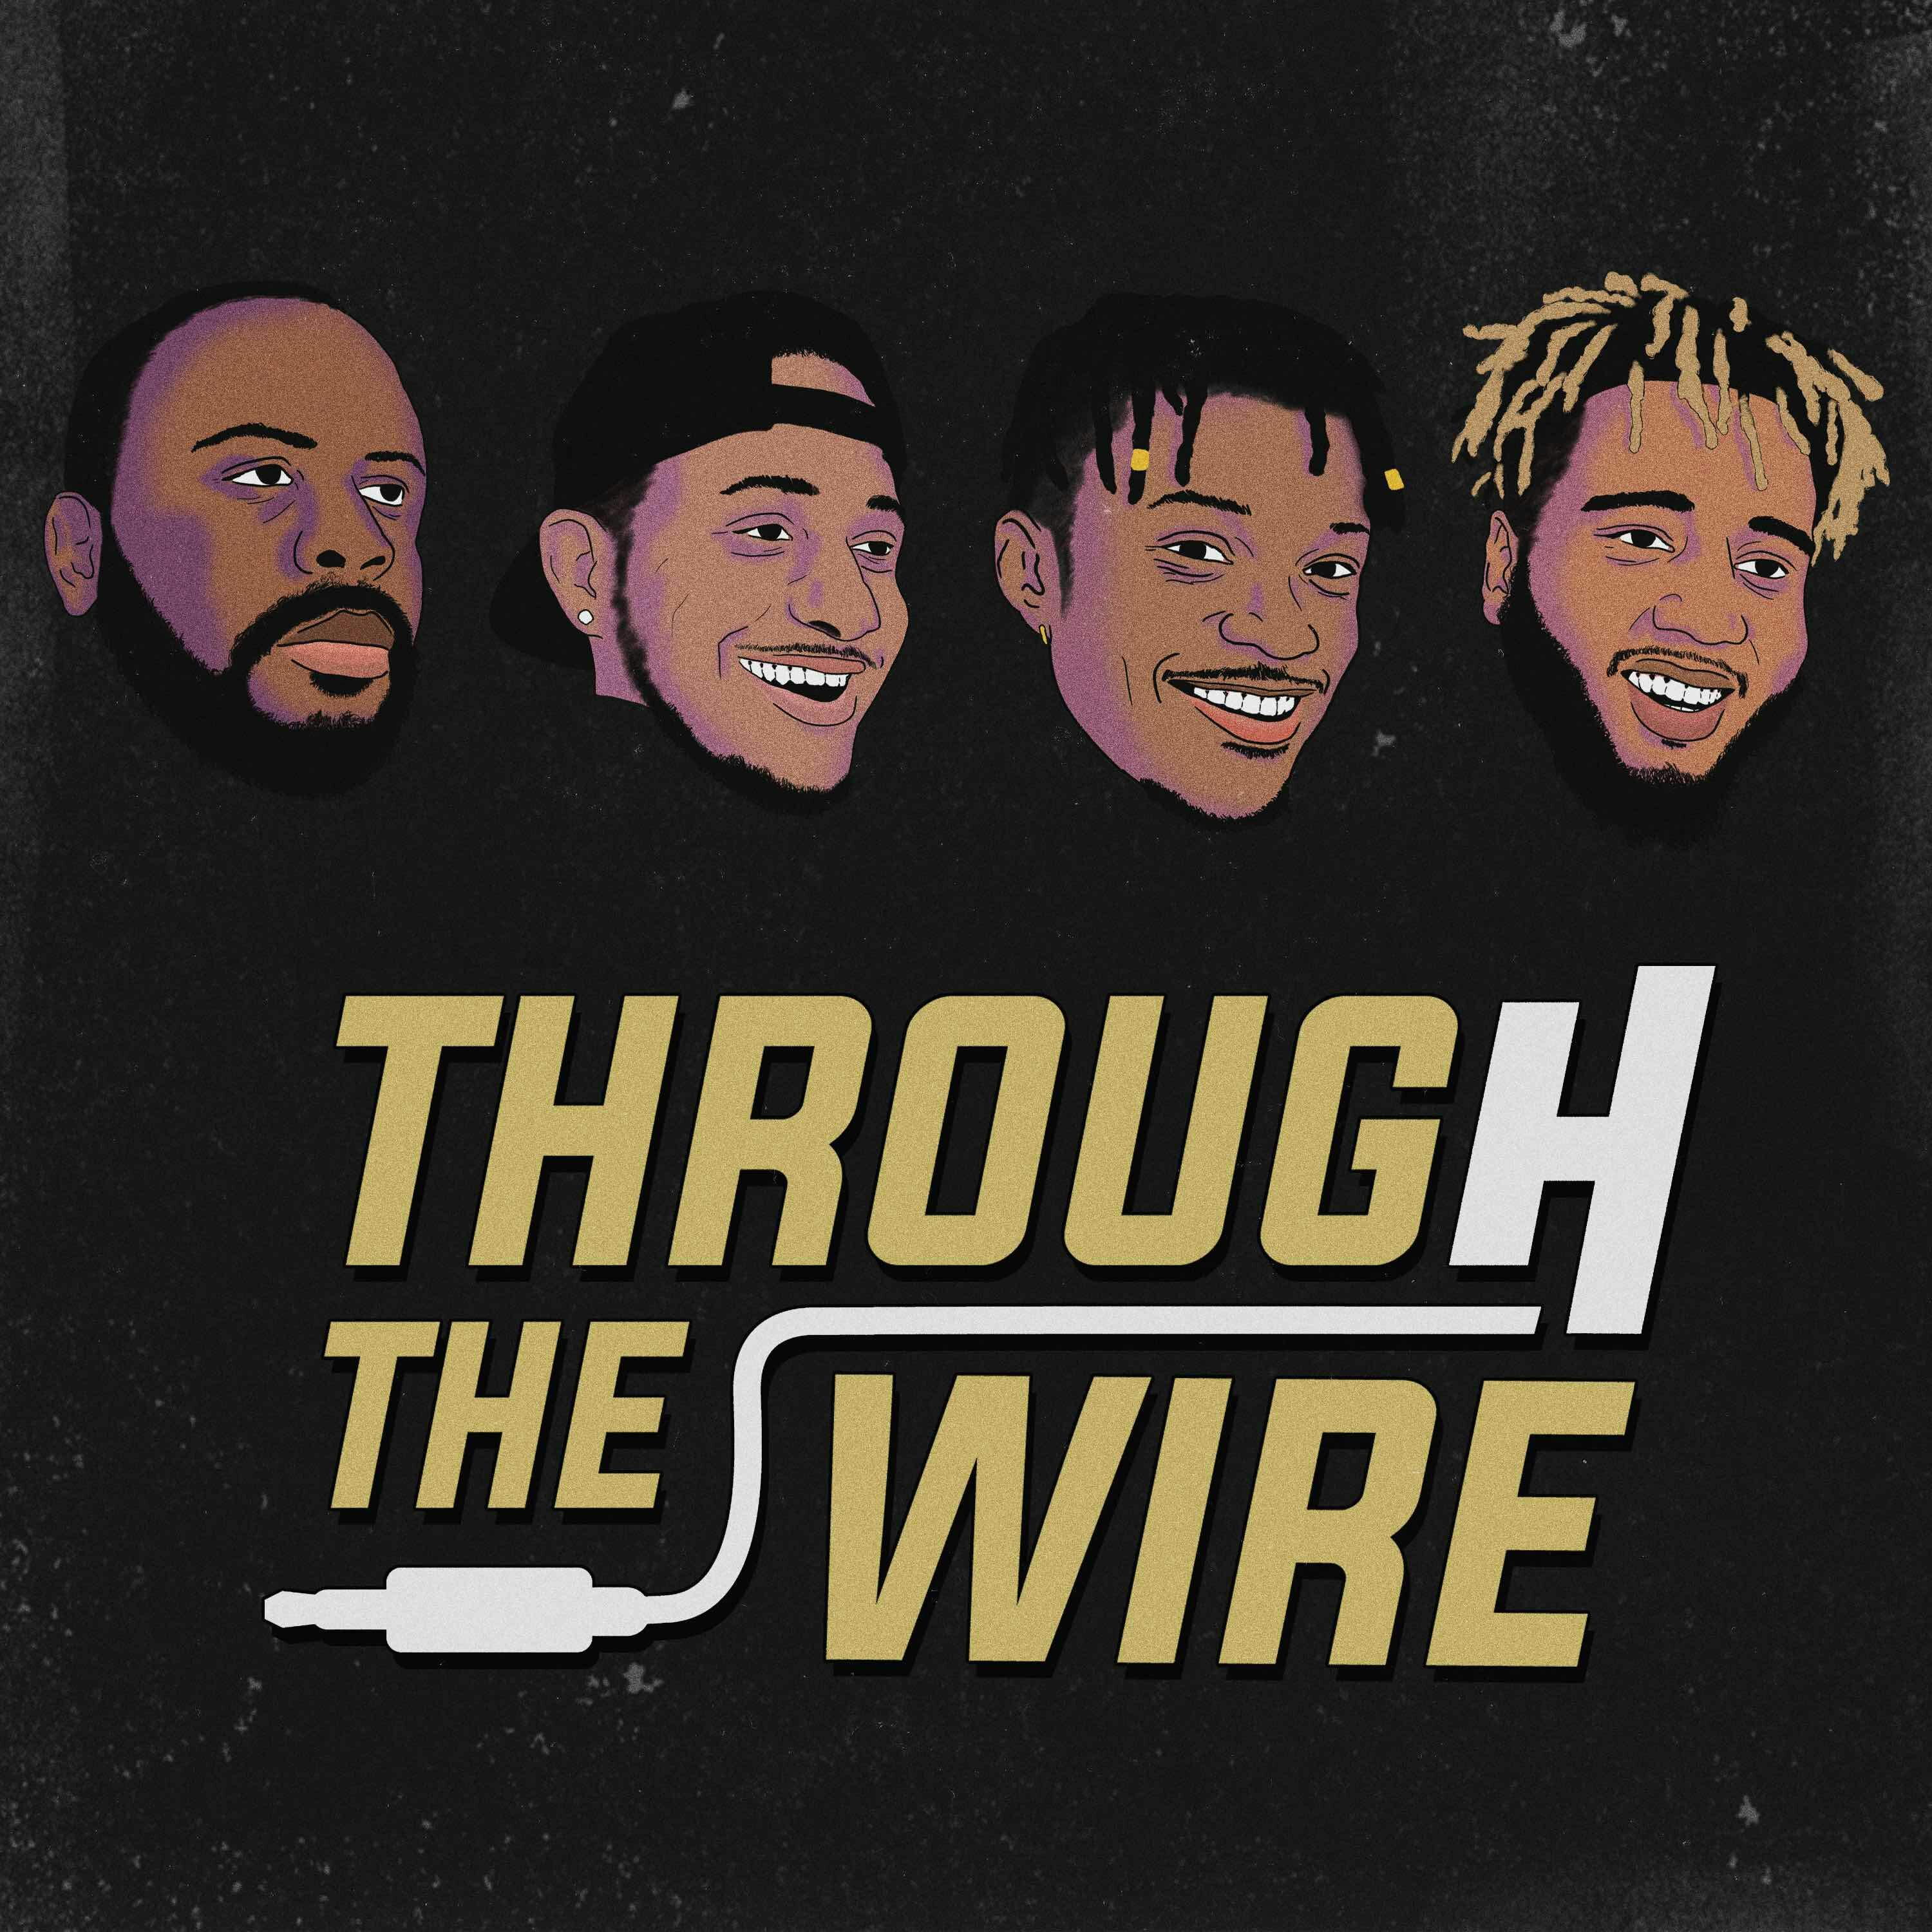 Which Team Could Trade For Bradley Beal Through The Wire Podcast